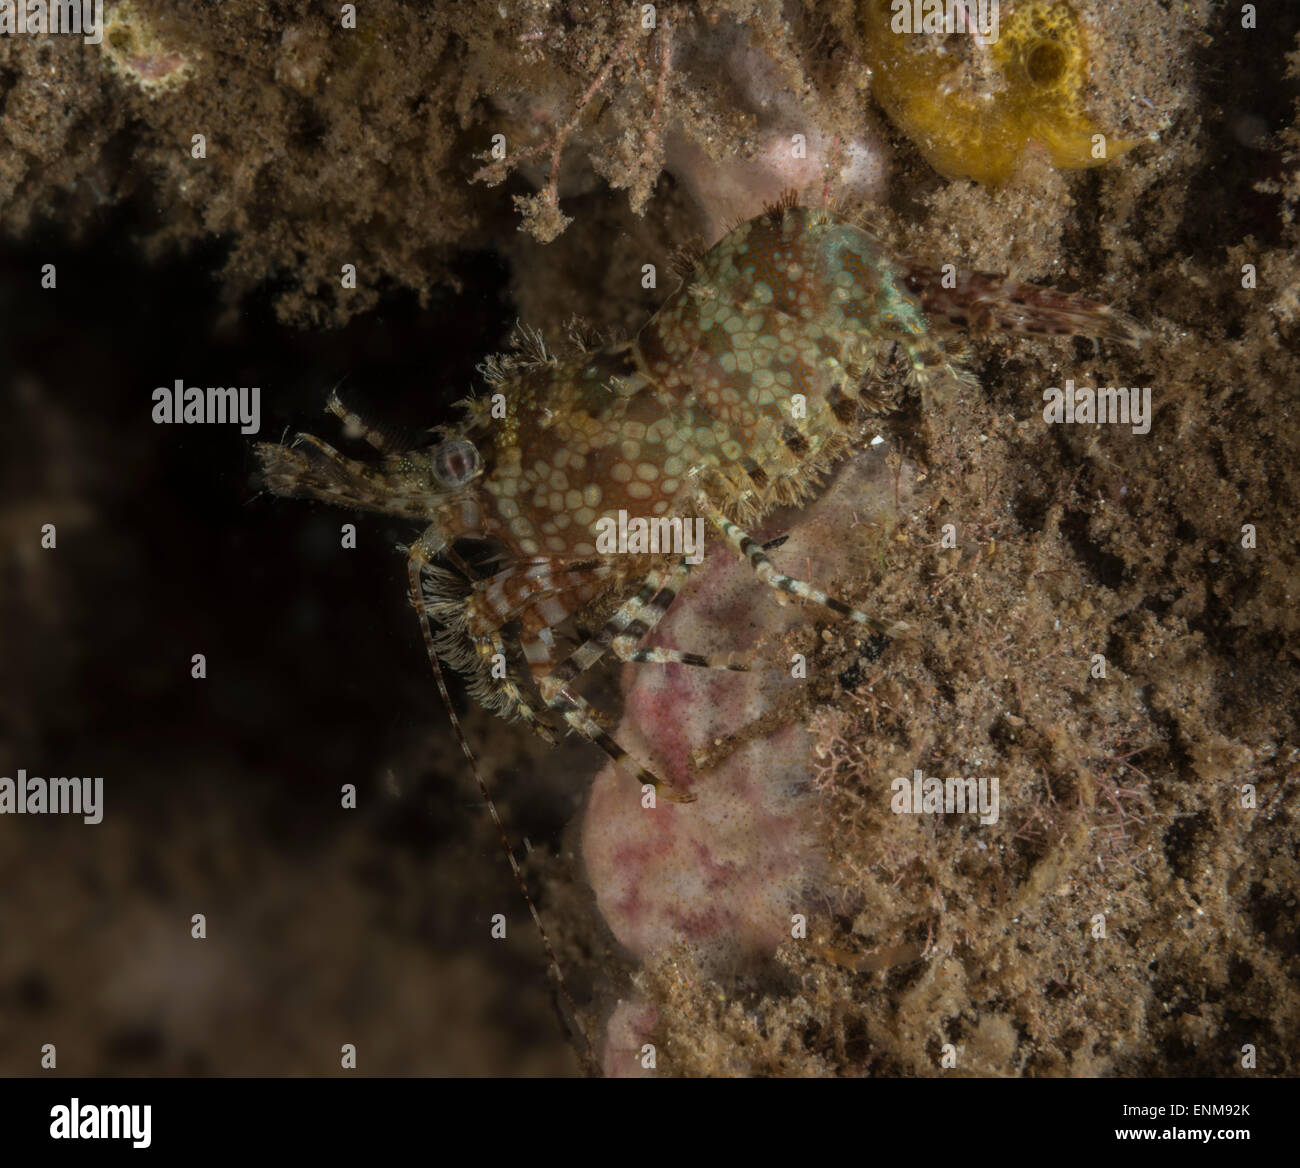 Common marble shrimp on a coral Stock Photo